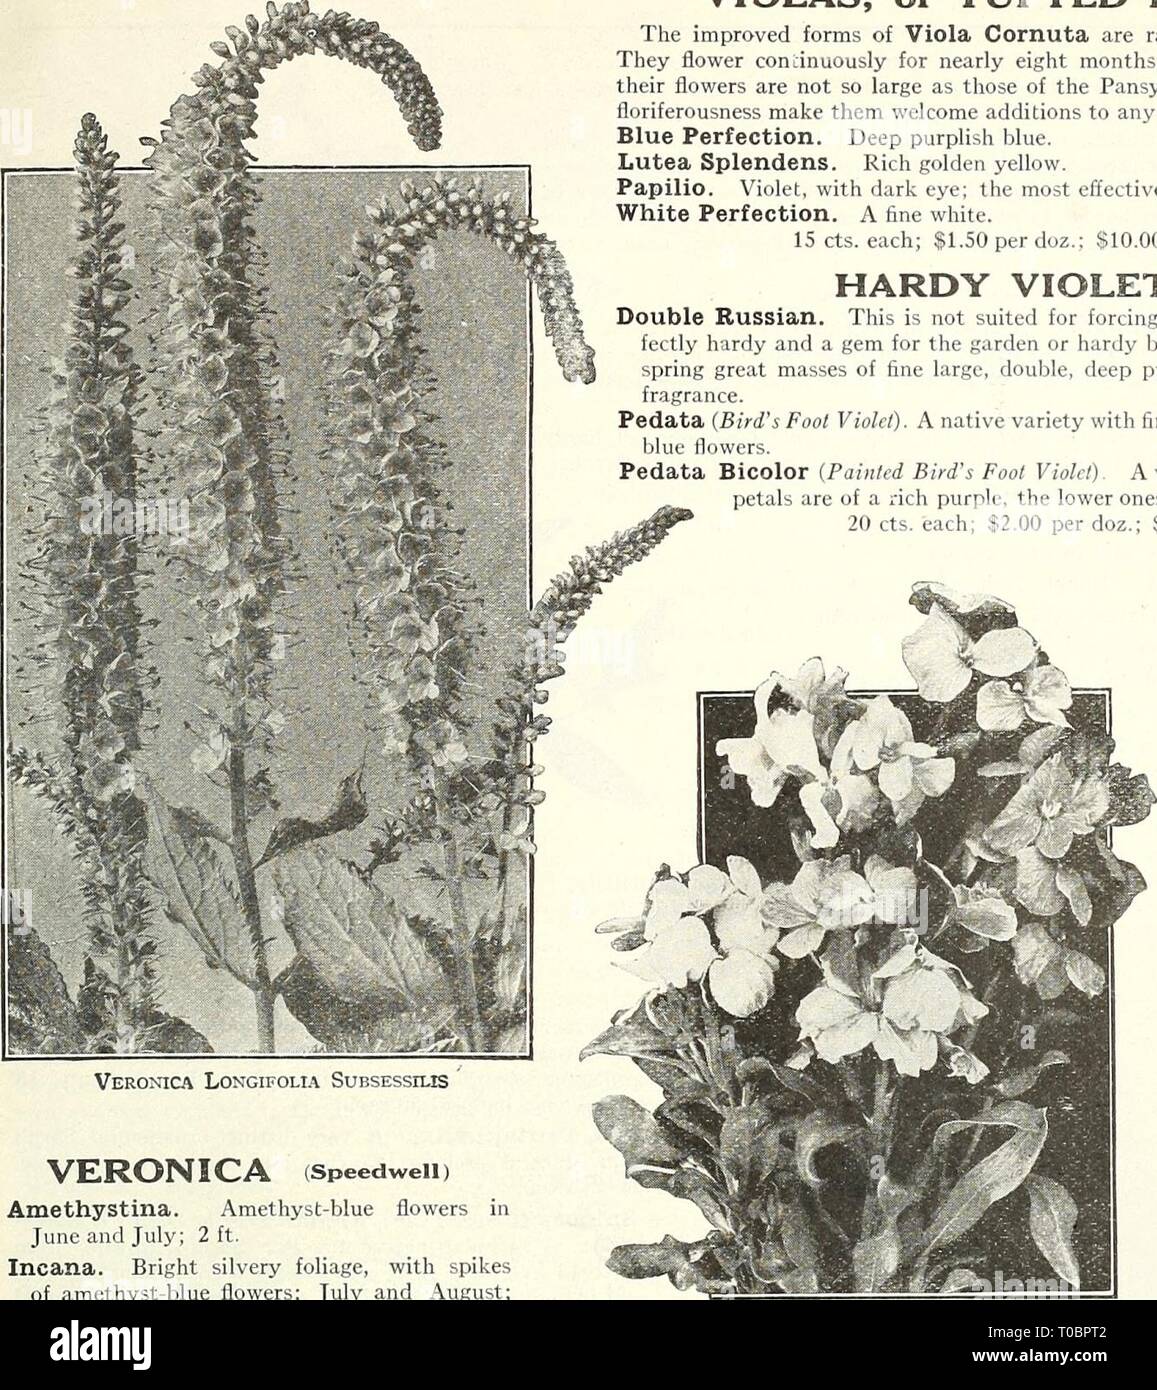 Dreer's garden book 1924 (1924) Dreer's garden book 1924 dreersgardenbook1924henr Year: 1924  /flEHiyAJREEfcffEt,^!iJa|.)aiilfei^^j&gt;^ 197    Veronica Longifolia Subsessilis VERONICA (Speedwell) Amethystina. Amethyst-blue flowers in June and July; 2 ft. Incana. Bright silvery foliage, with spikes of amethyst-blue flowers; July and August; 1 foot. Longifolia SubseSSiliS (Japanese speedwell). The showiest and best of the Speedwells; forms a bushy plant 2 to 3 feet high, with long dense spikes of deep blue flowers from the middle of July to early in September. (See cut.) Maritima. Long spikes o Stock Photo